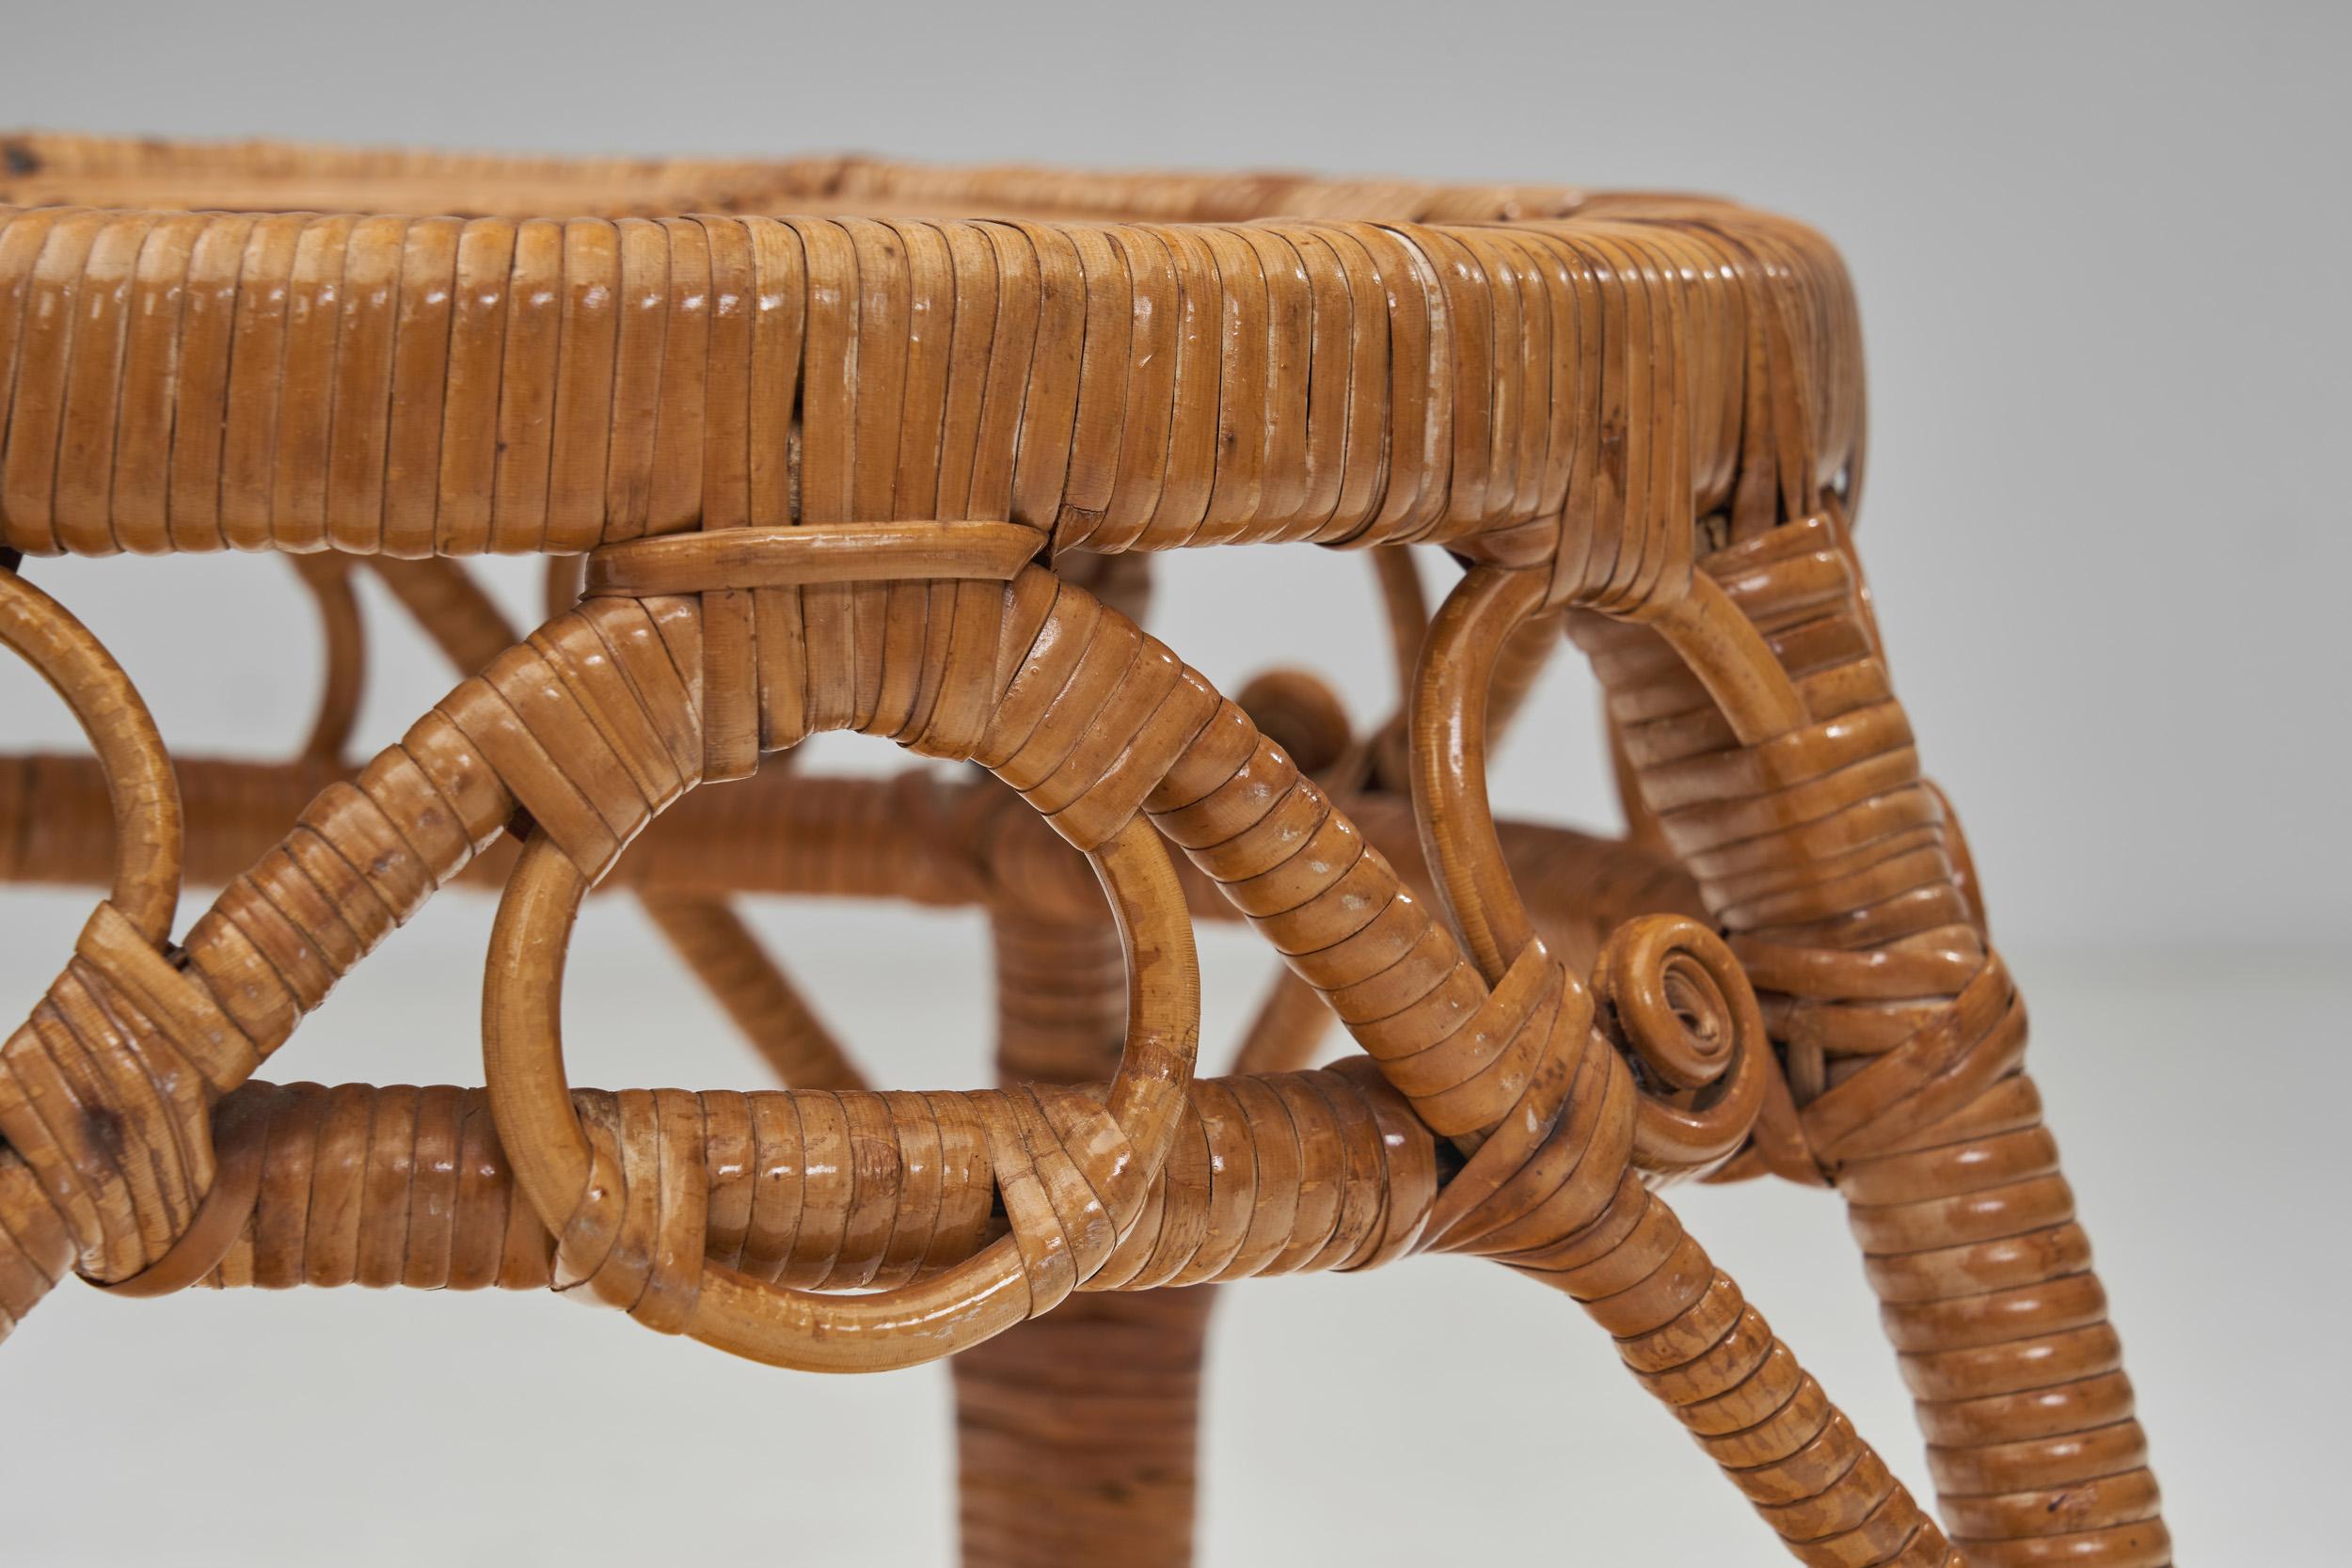 Woven Rattan Stool, Europe Early 20th Century For Sale 4